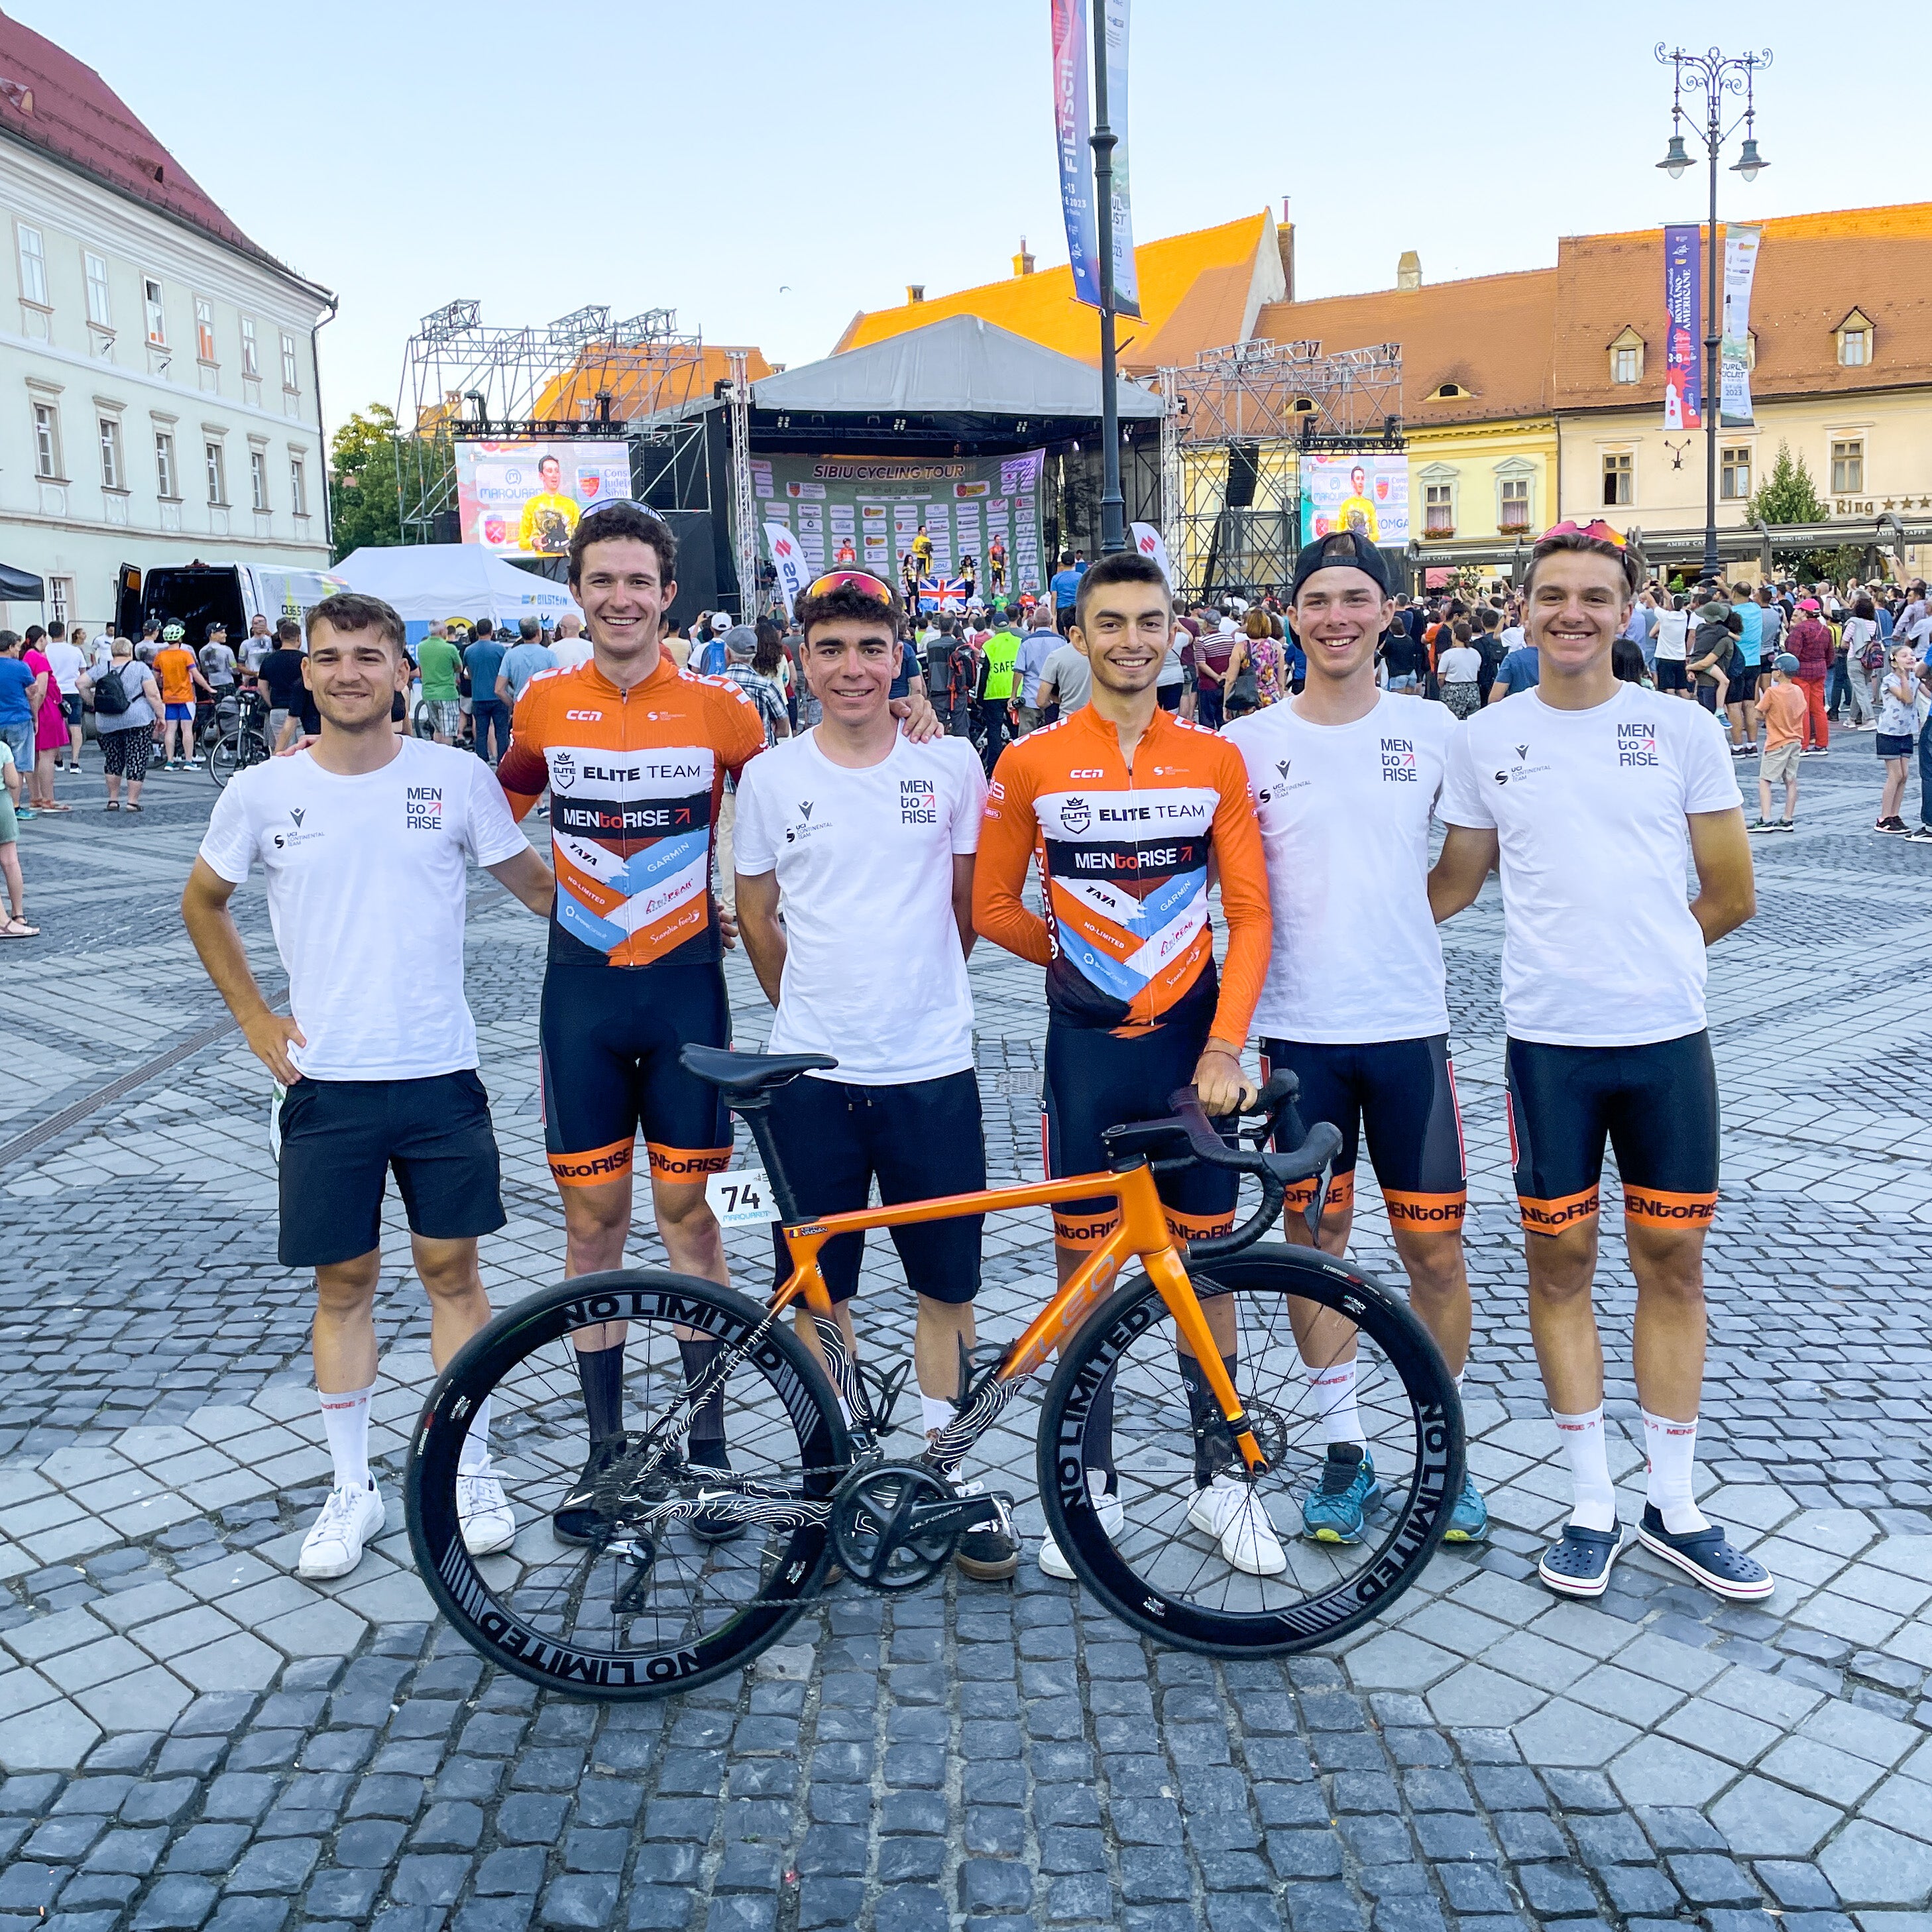 Mentorise Elite Team Conquers the Sibiu Cycling Tour: A Test of Grit and Determination